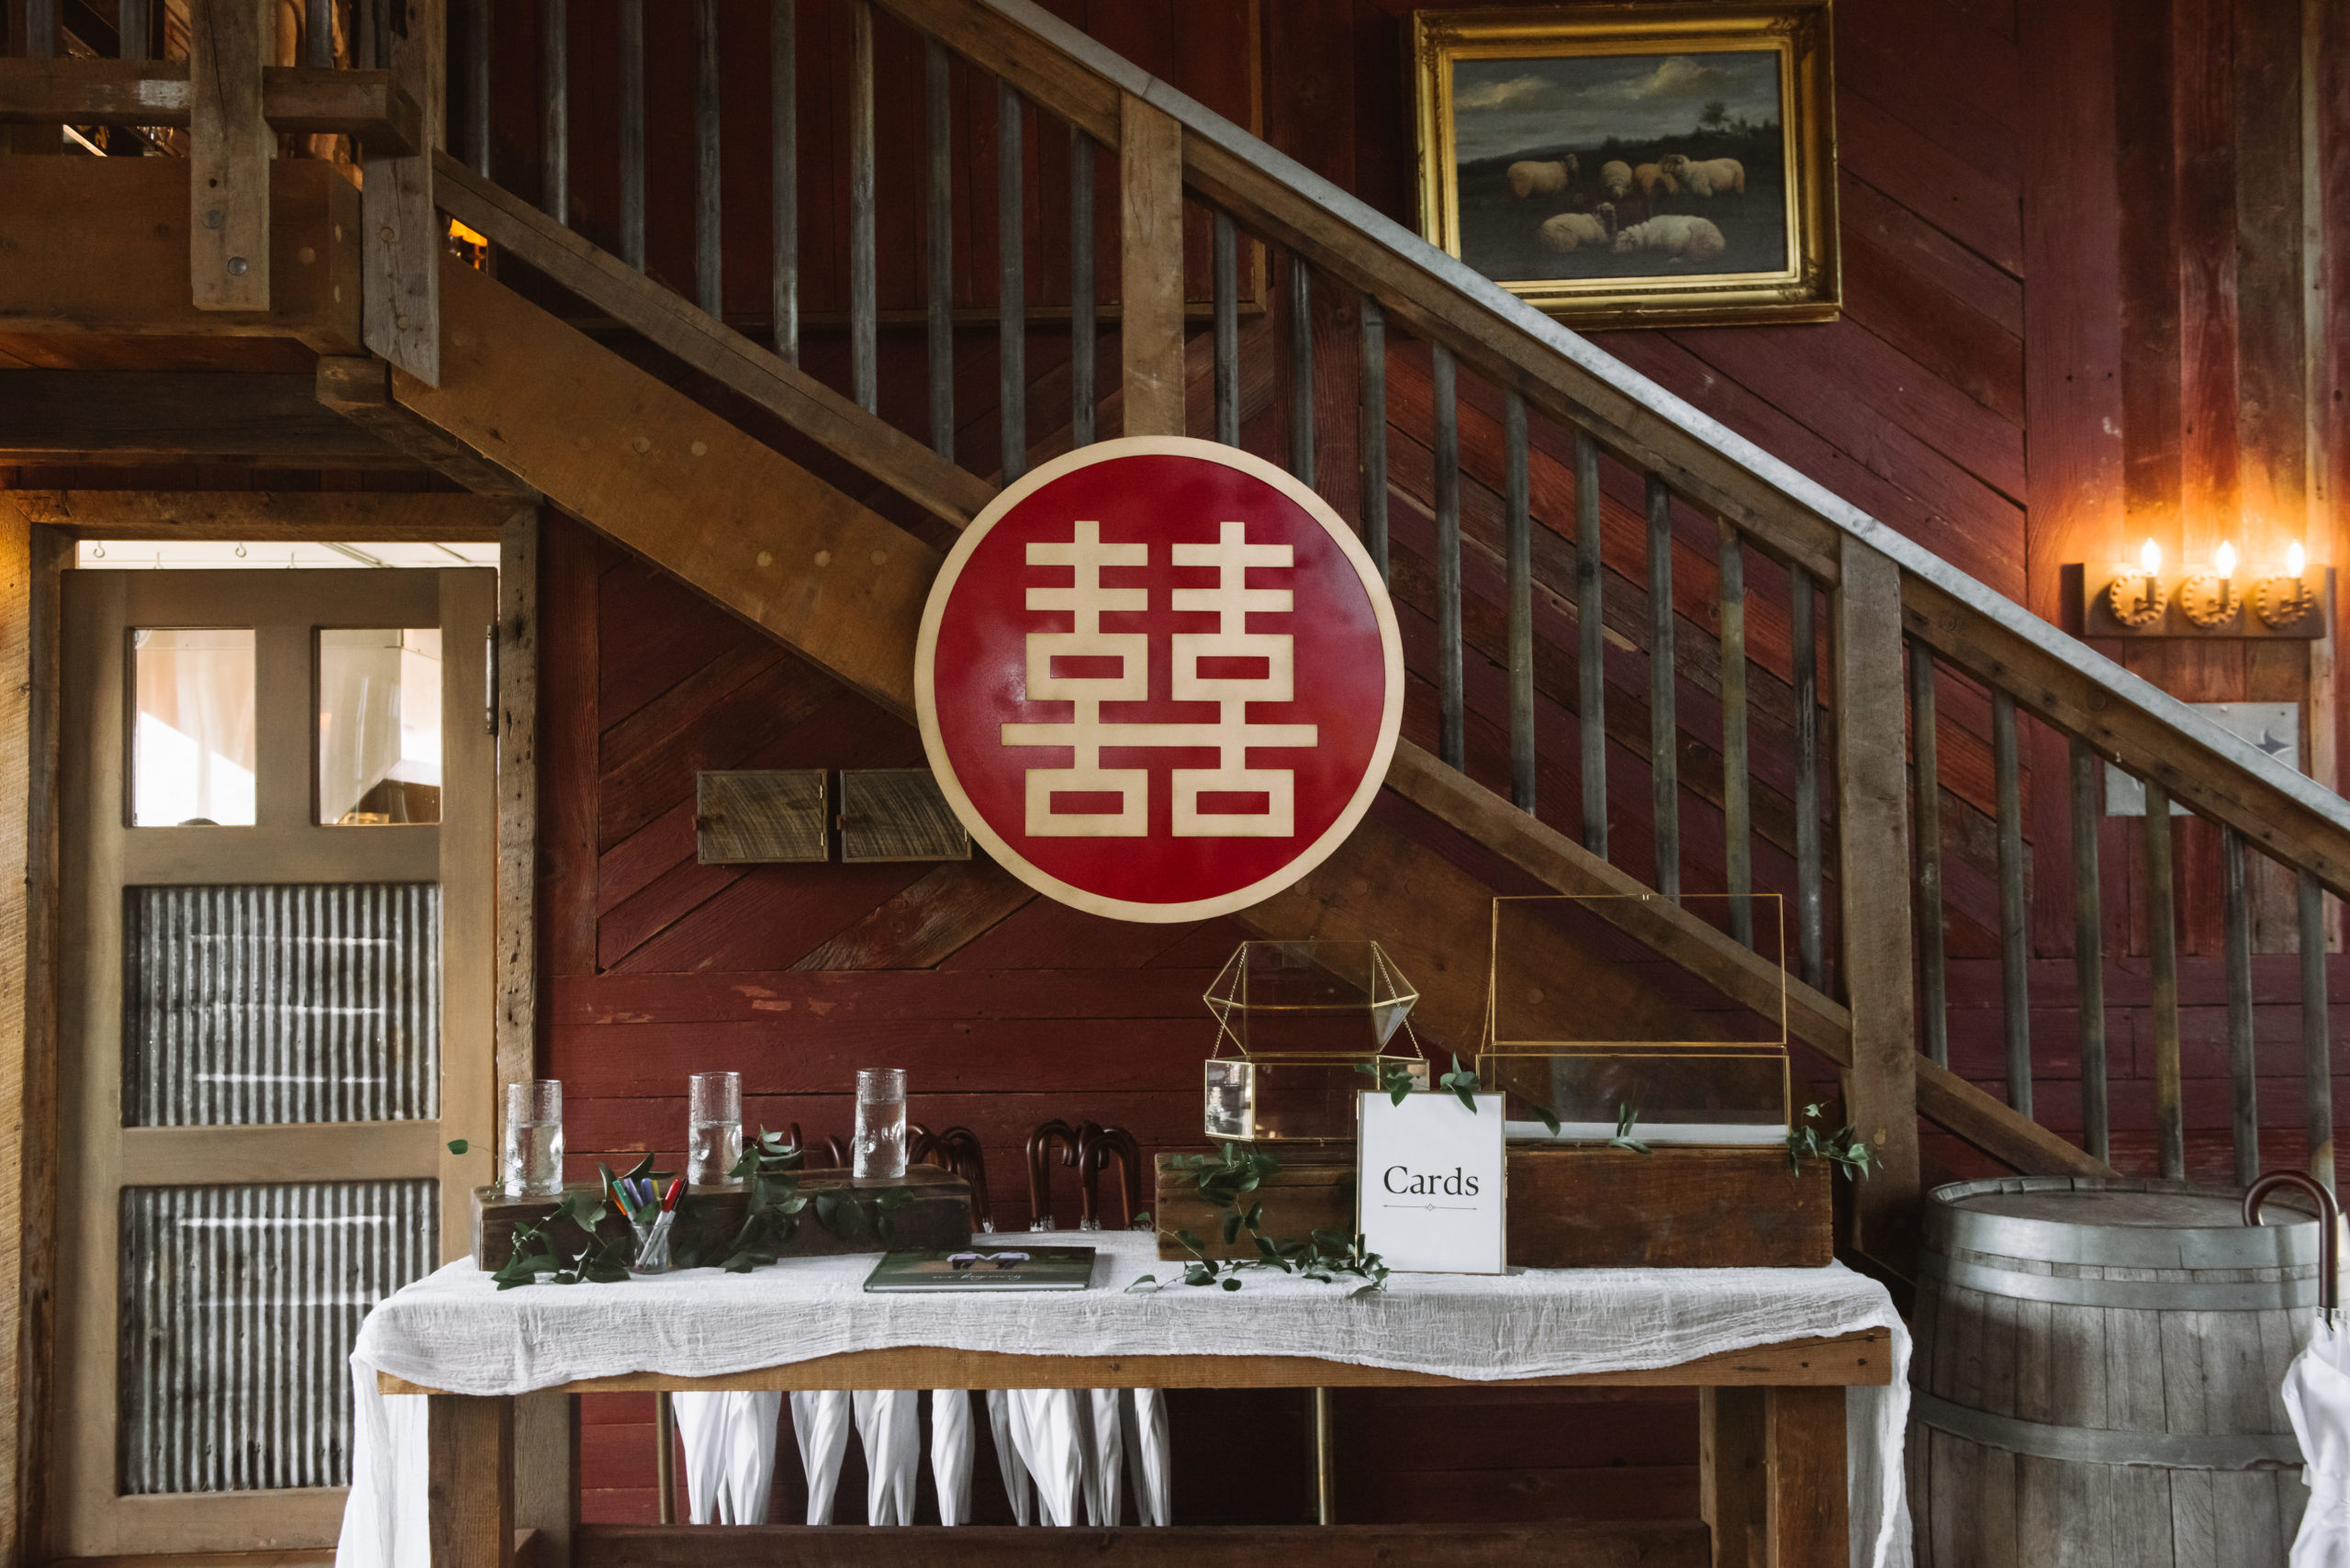 Big "double happiness" Chinese character sign. The character and outline are a light brown/gold and the background of the sign is a deep red. It is hanging on a staircase above the guest book and cards/gifts table. 